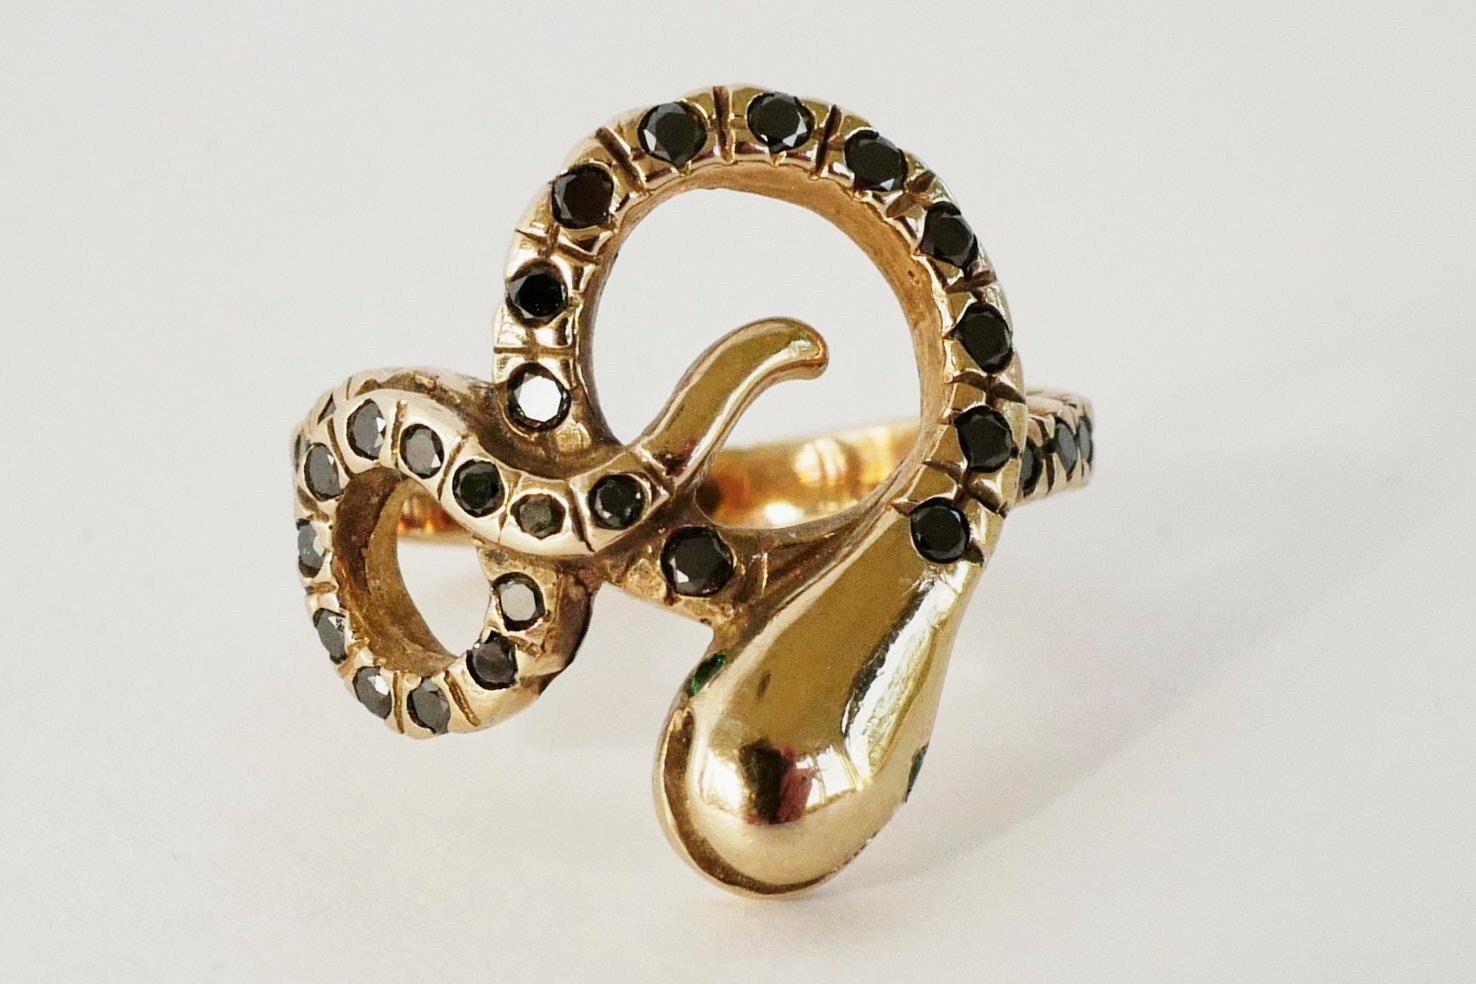 Brilliant Cut Black Diamond Emerald Eyes Gold Snake Ring Victorian Style For Sale